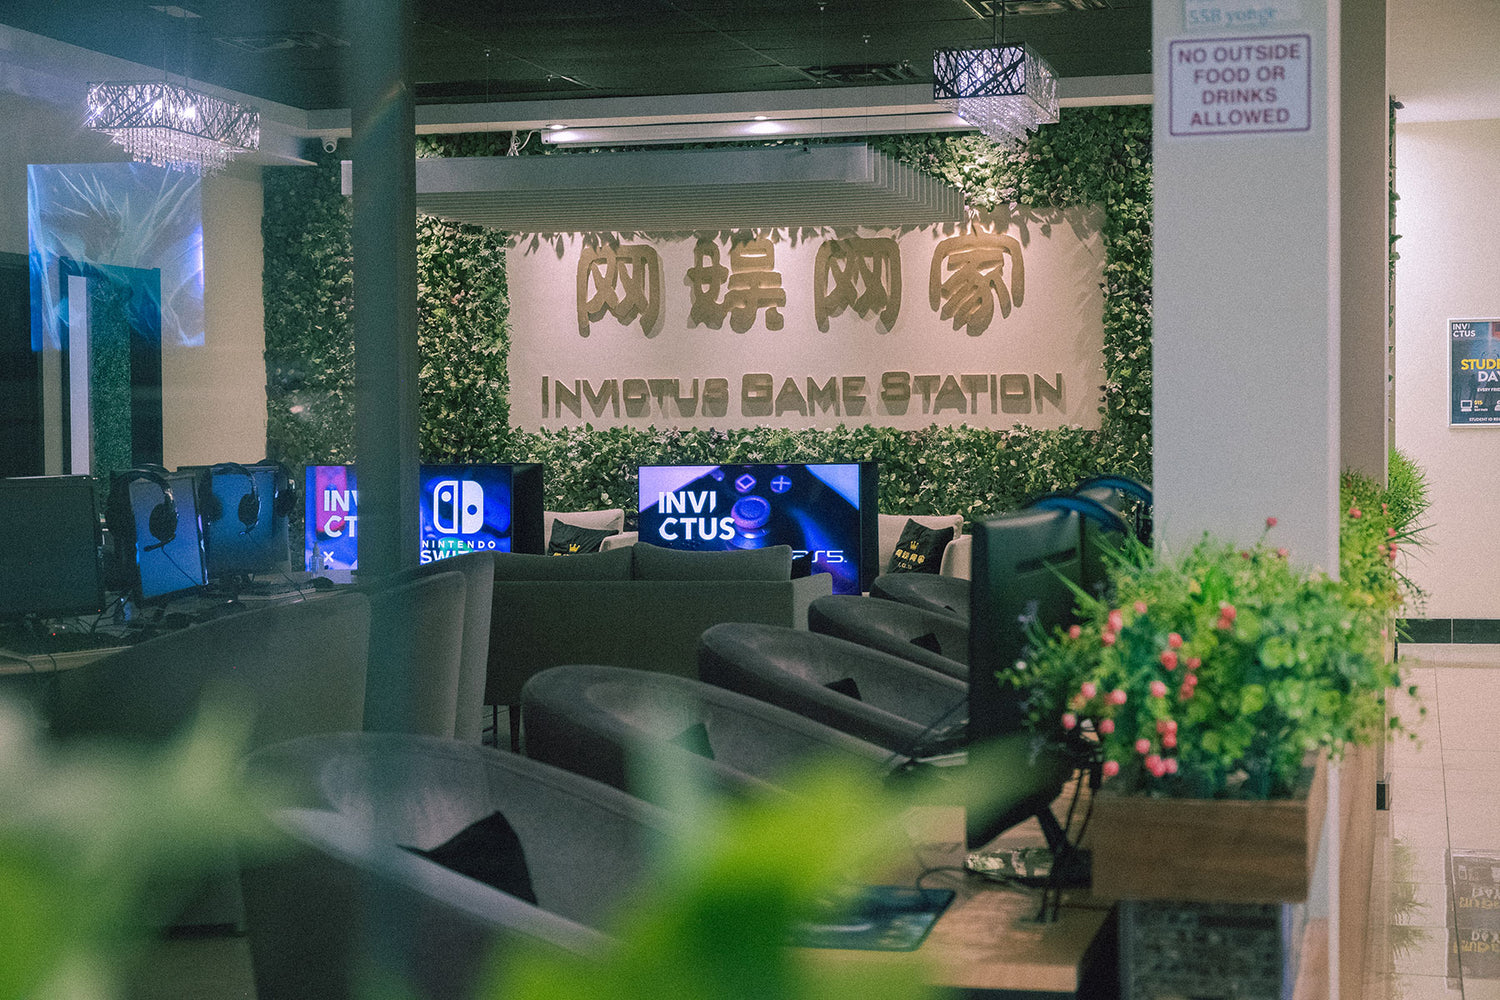 Inside a gaming cafe, several players are focused on monitors displaying a first-person shooter game. Foregrounded by out-of-focus green foliage, the screens show detailed in-game graphics, while in the background, a promotional gaming poster adds to the immersive environment.